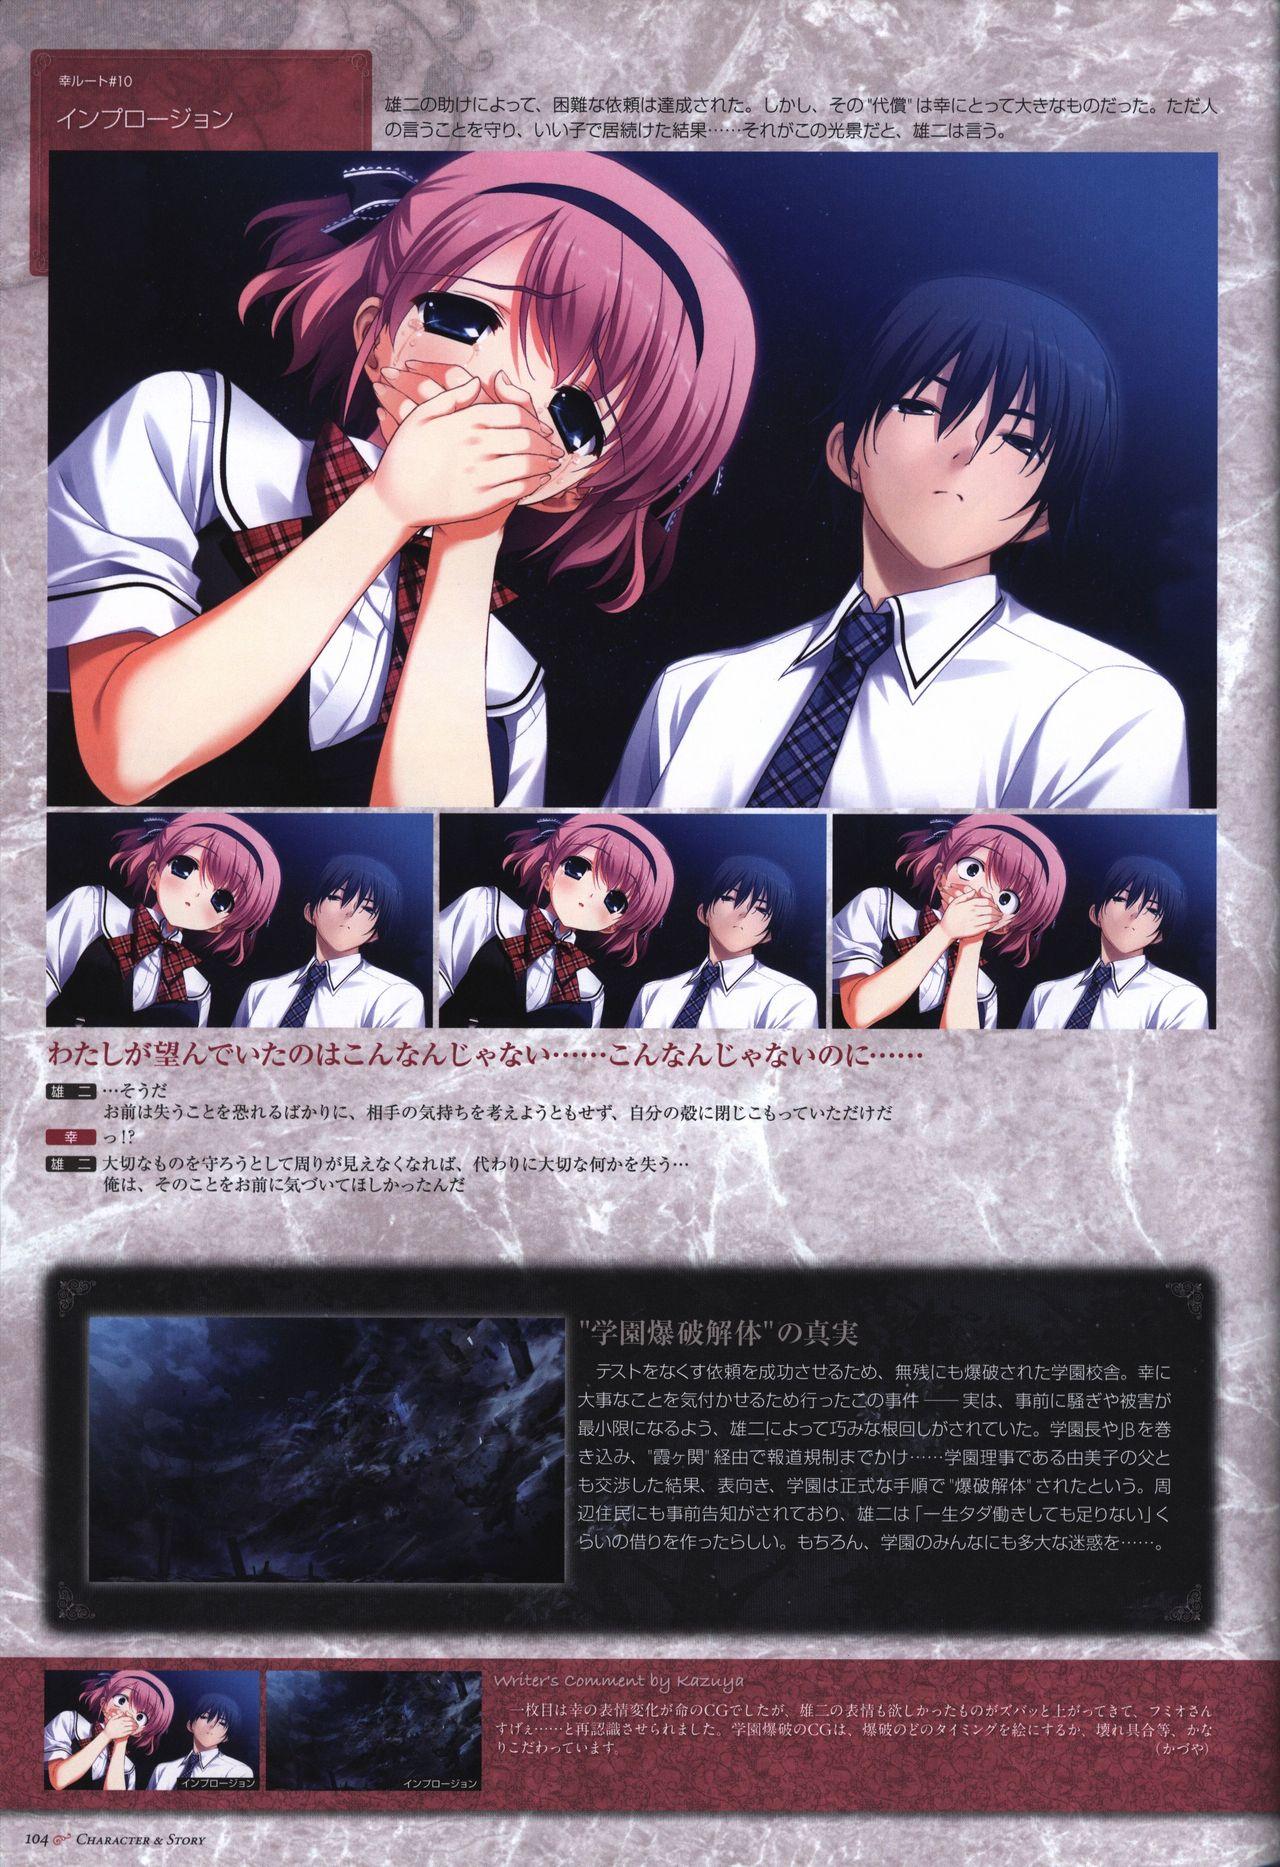 The Fruit of Grisaia Visual FanBook 104